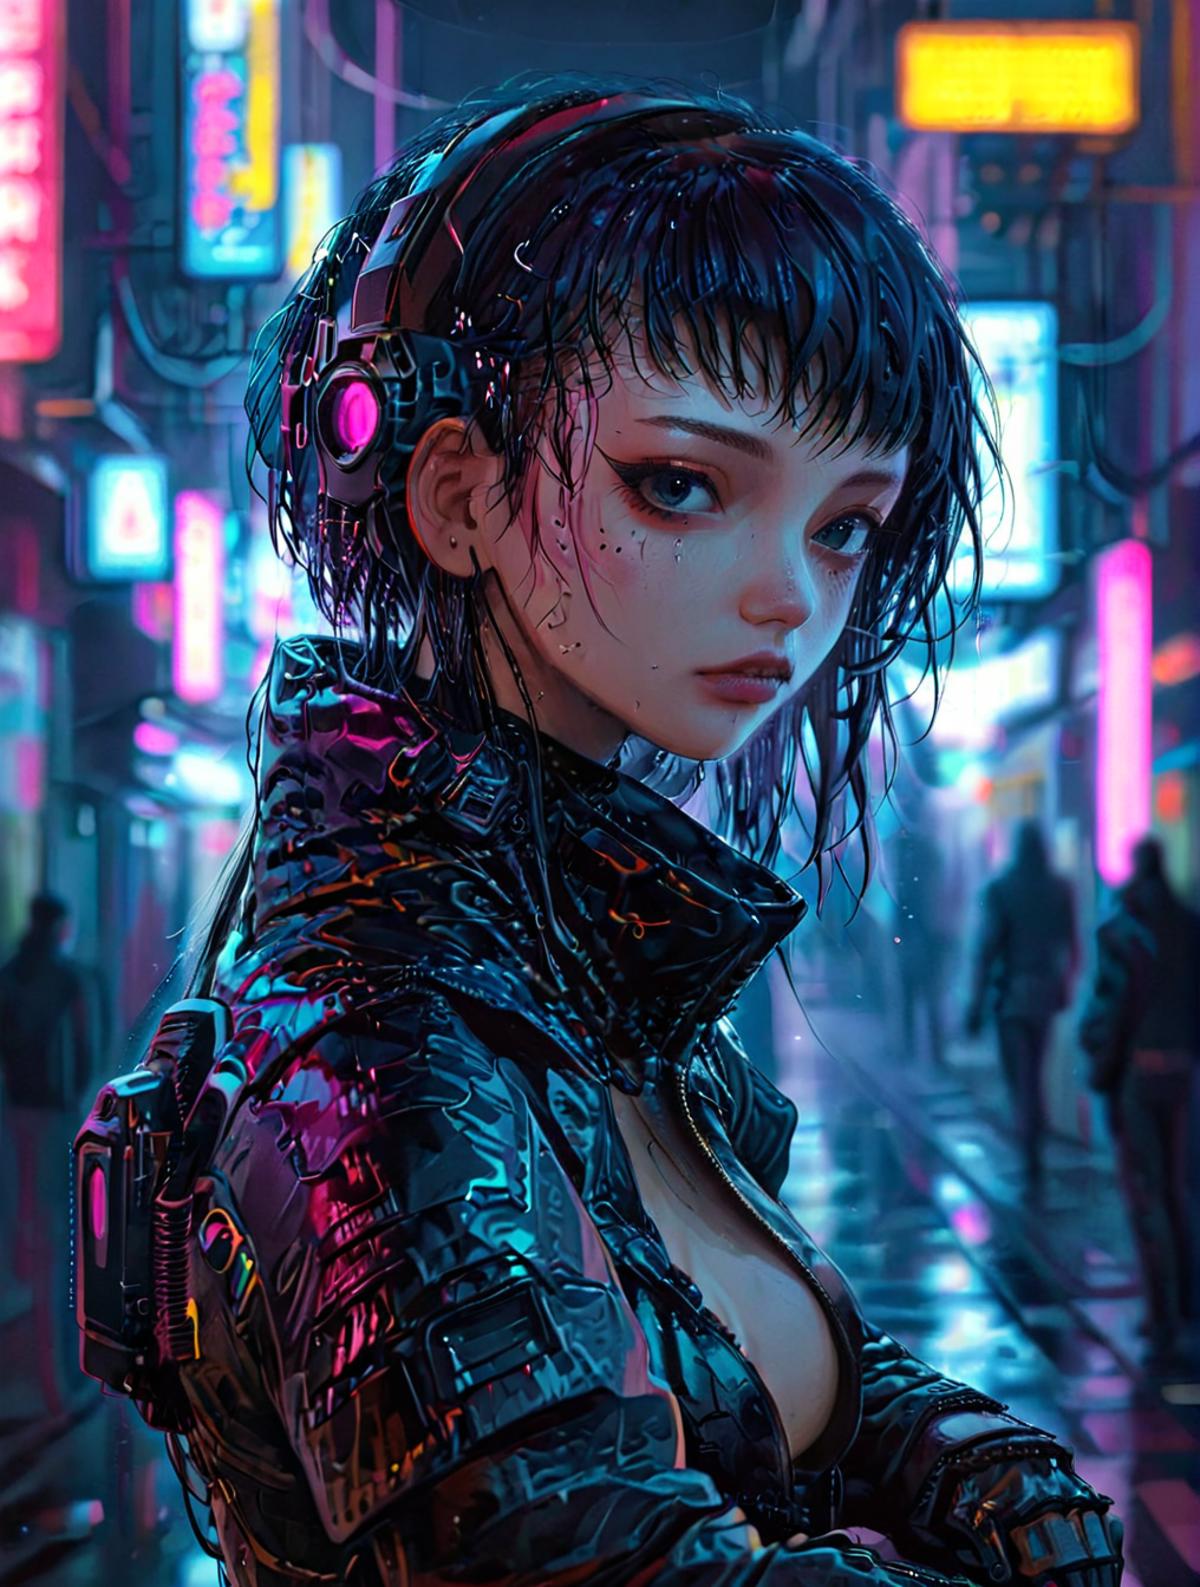 CyberpunkMJXL image by totes